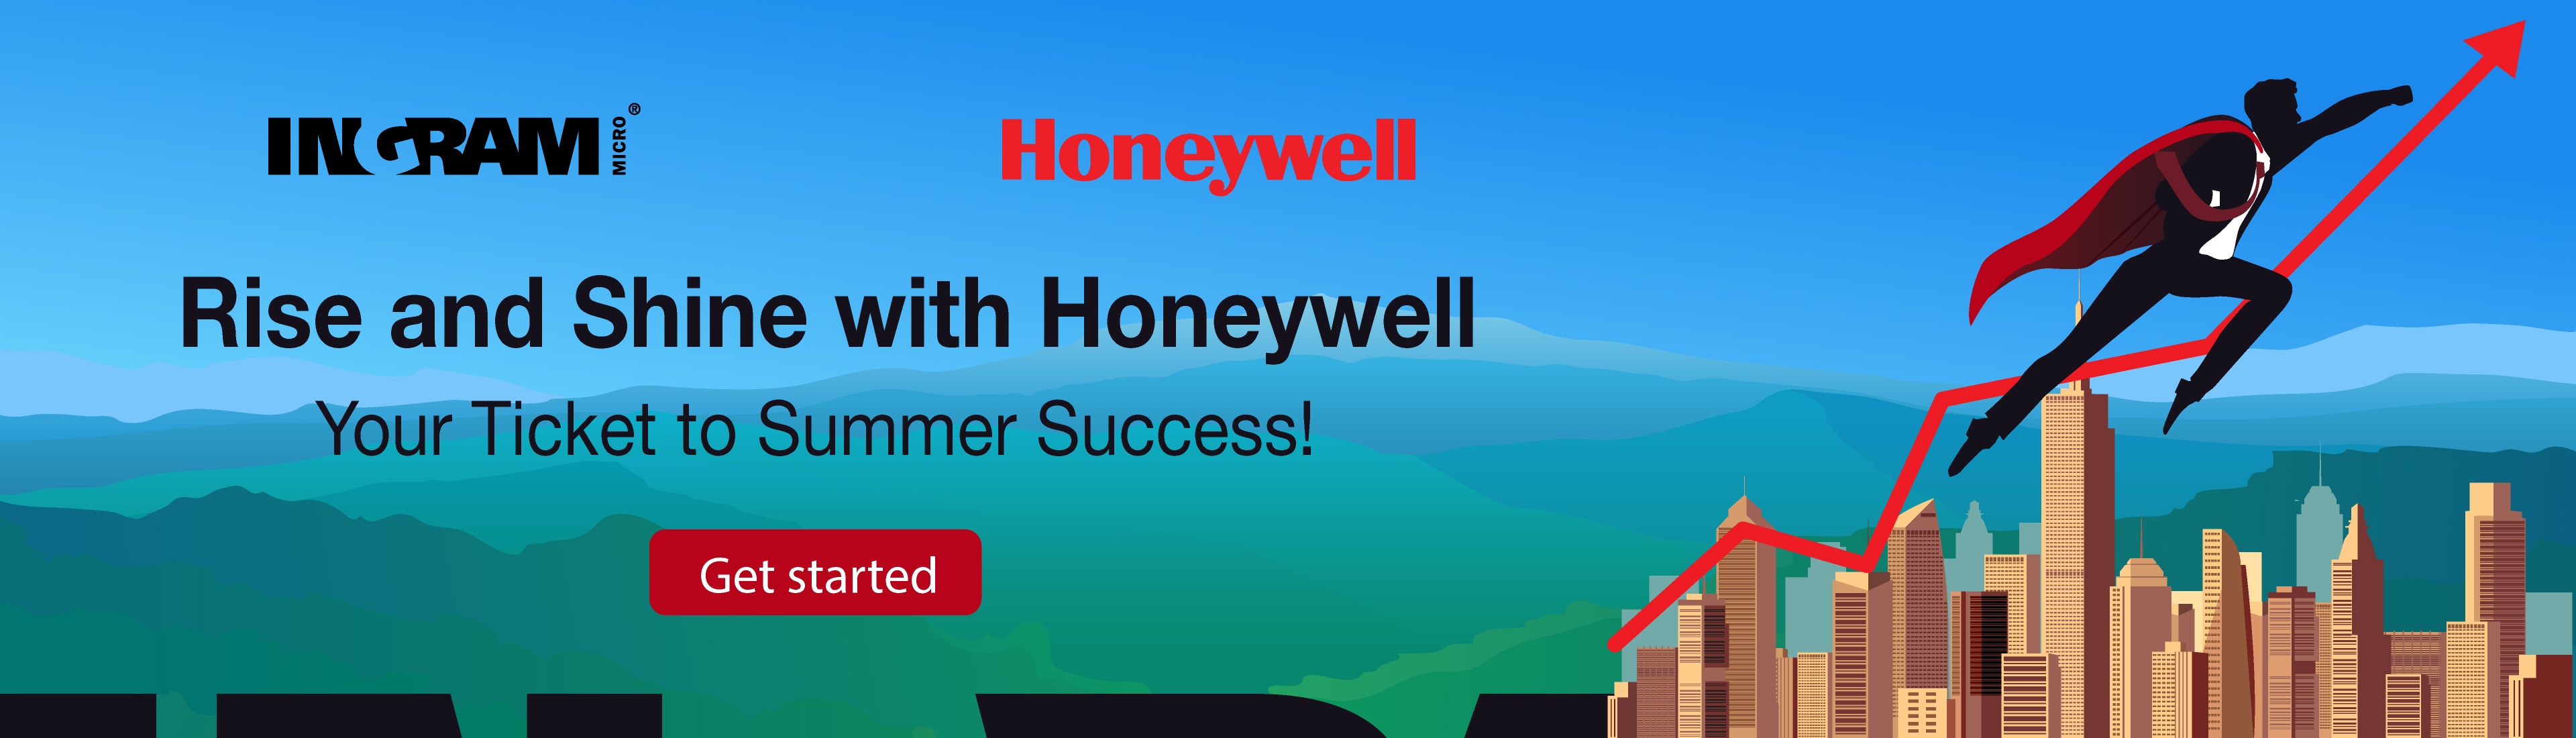 Rise and Shine with Honeywell